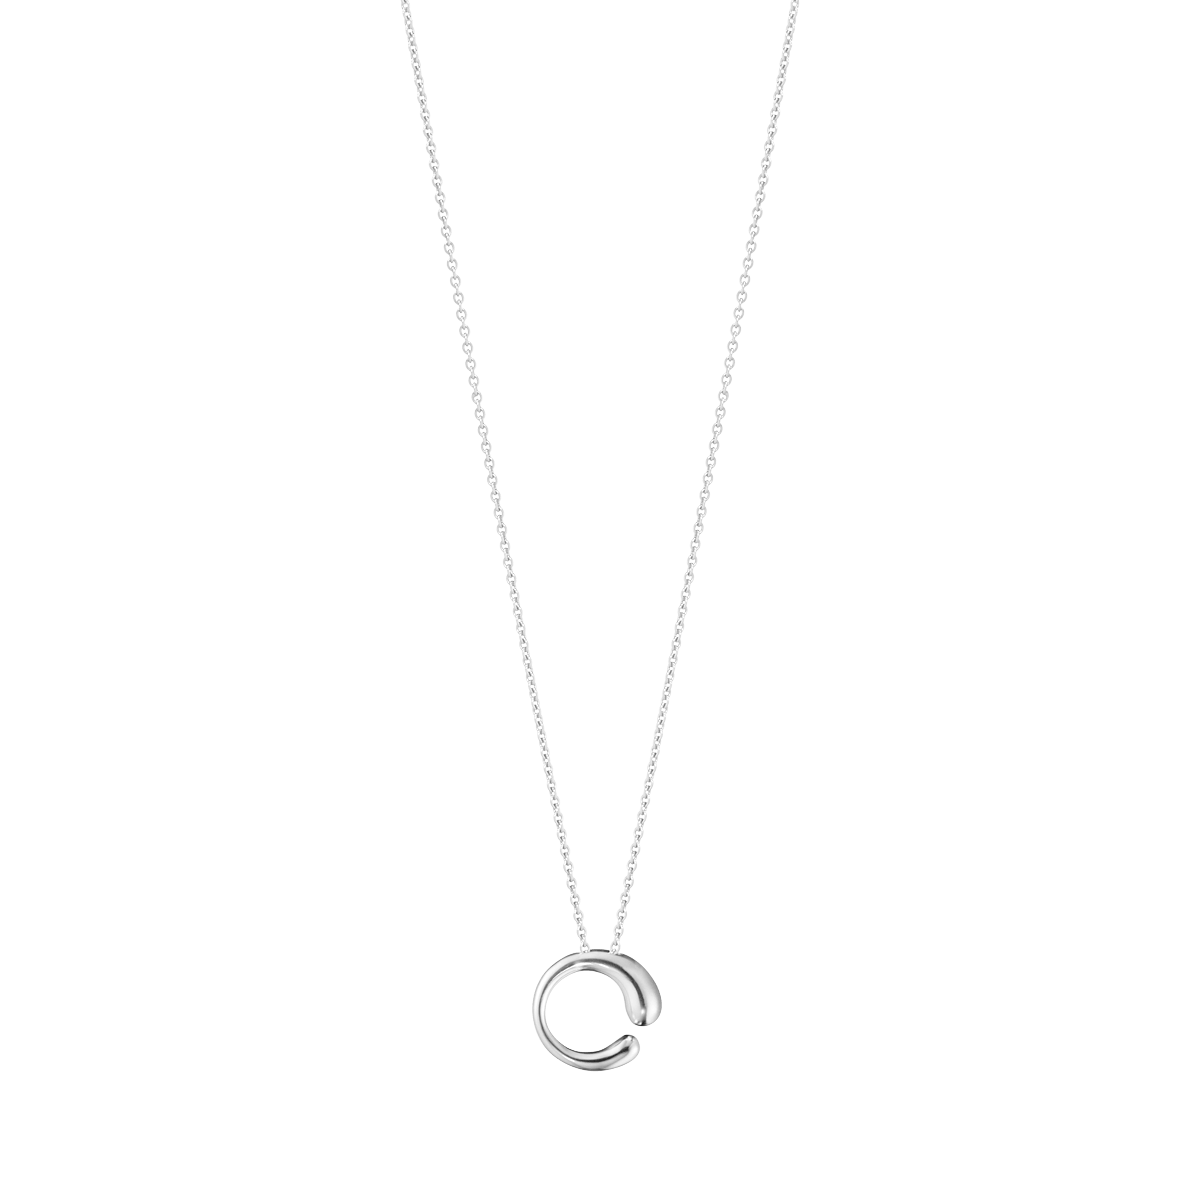 georg jensen sterling silver small mercy pendant on chain 10015155